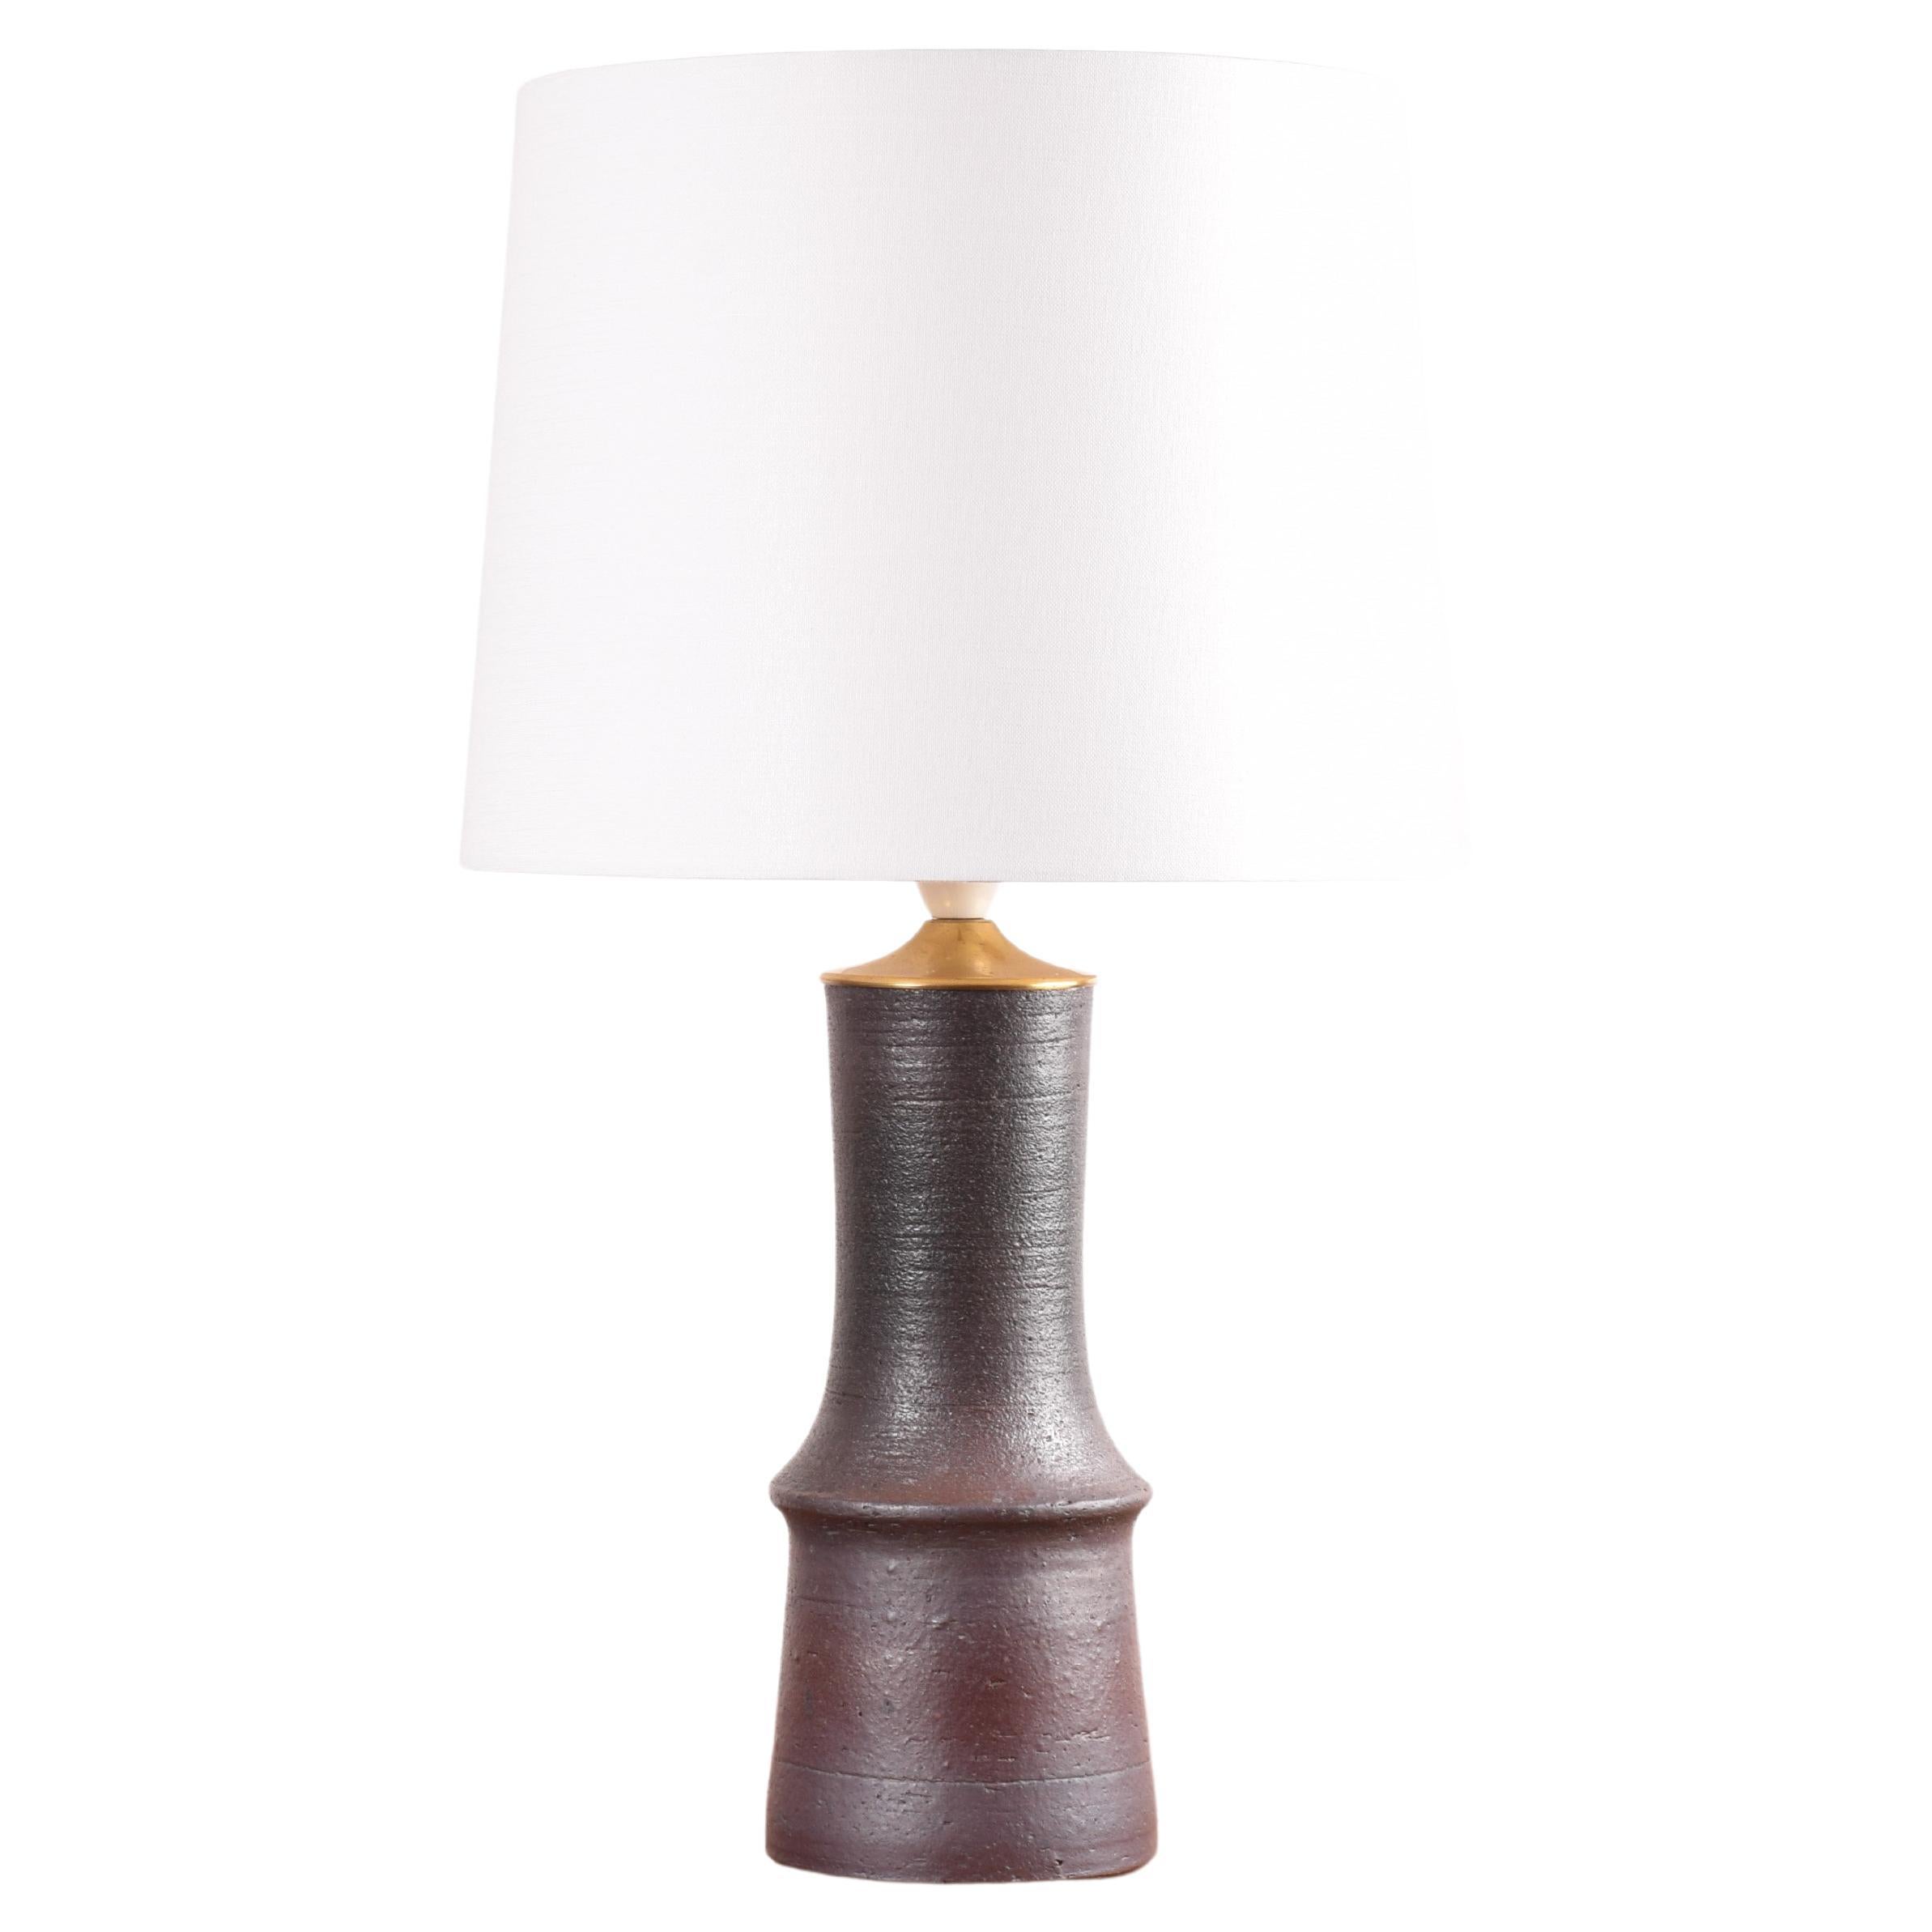 Midcentury Arabia Finland Tall Table Lamp Brown with Brass, Liisa Hallamaa 1960s For Sale